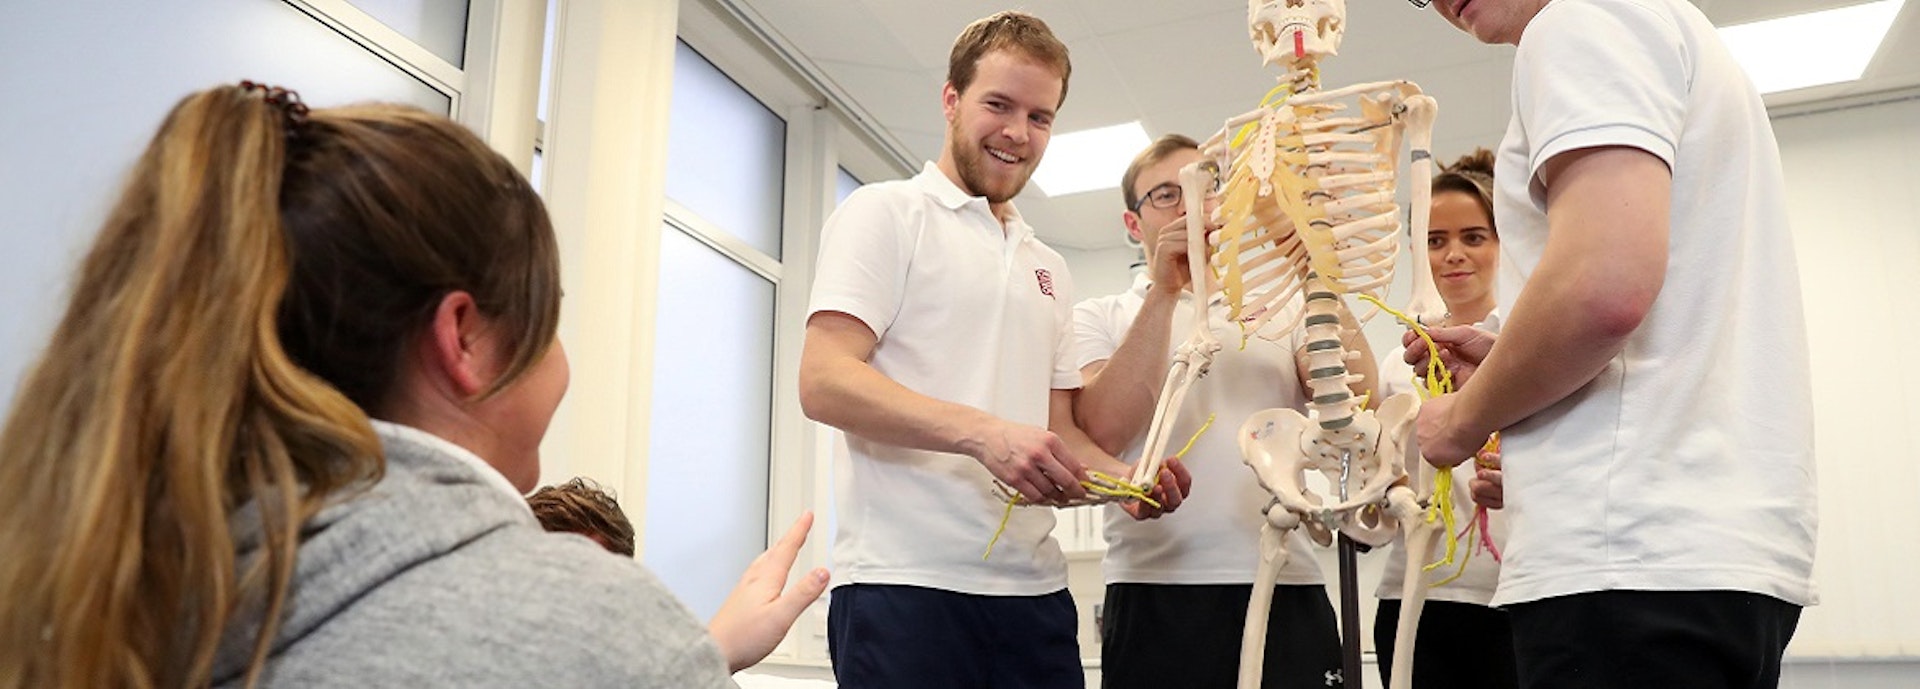 Physiotherapy students with skeleton model